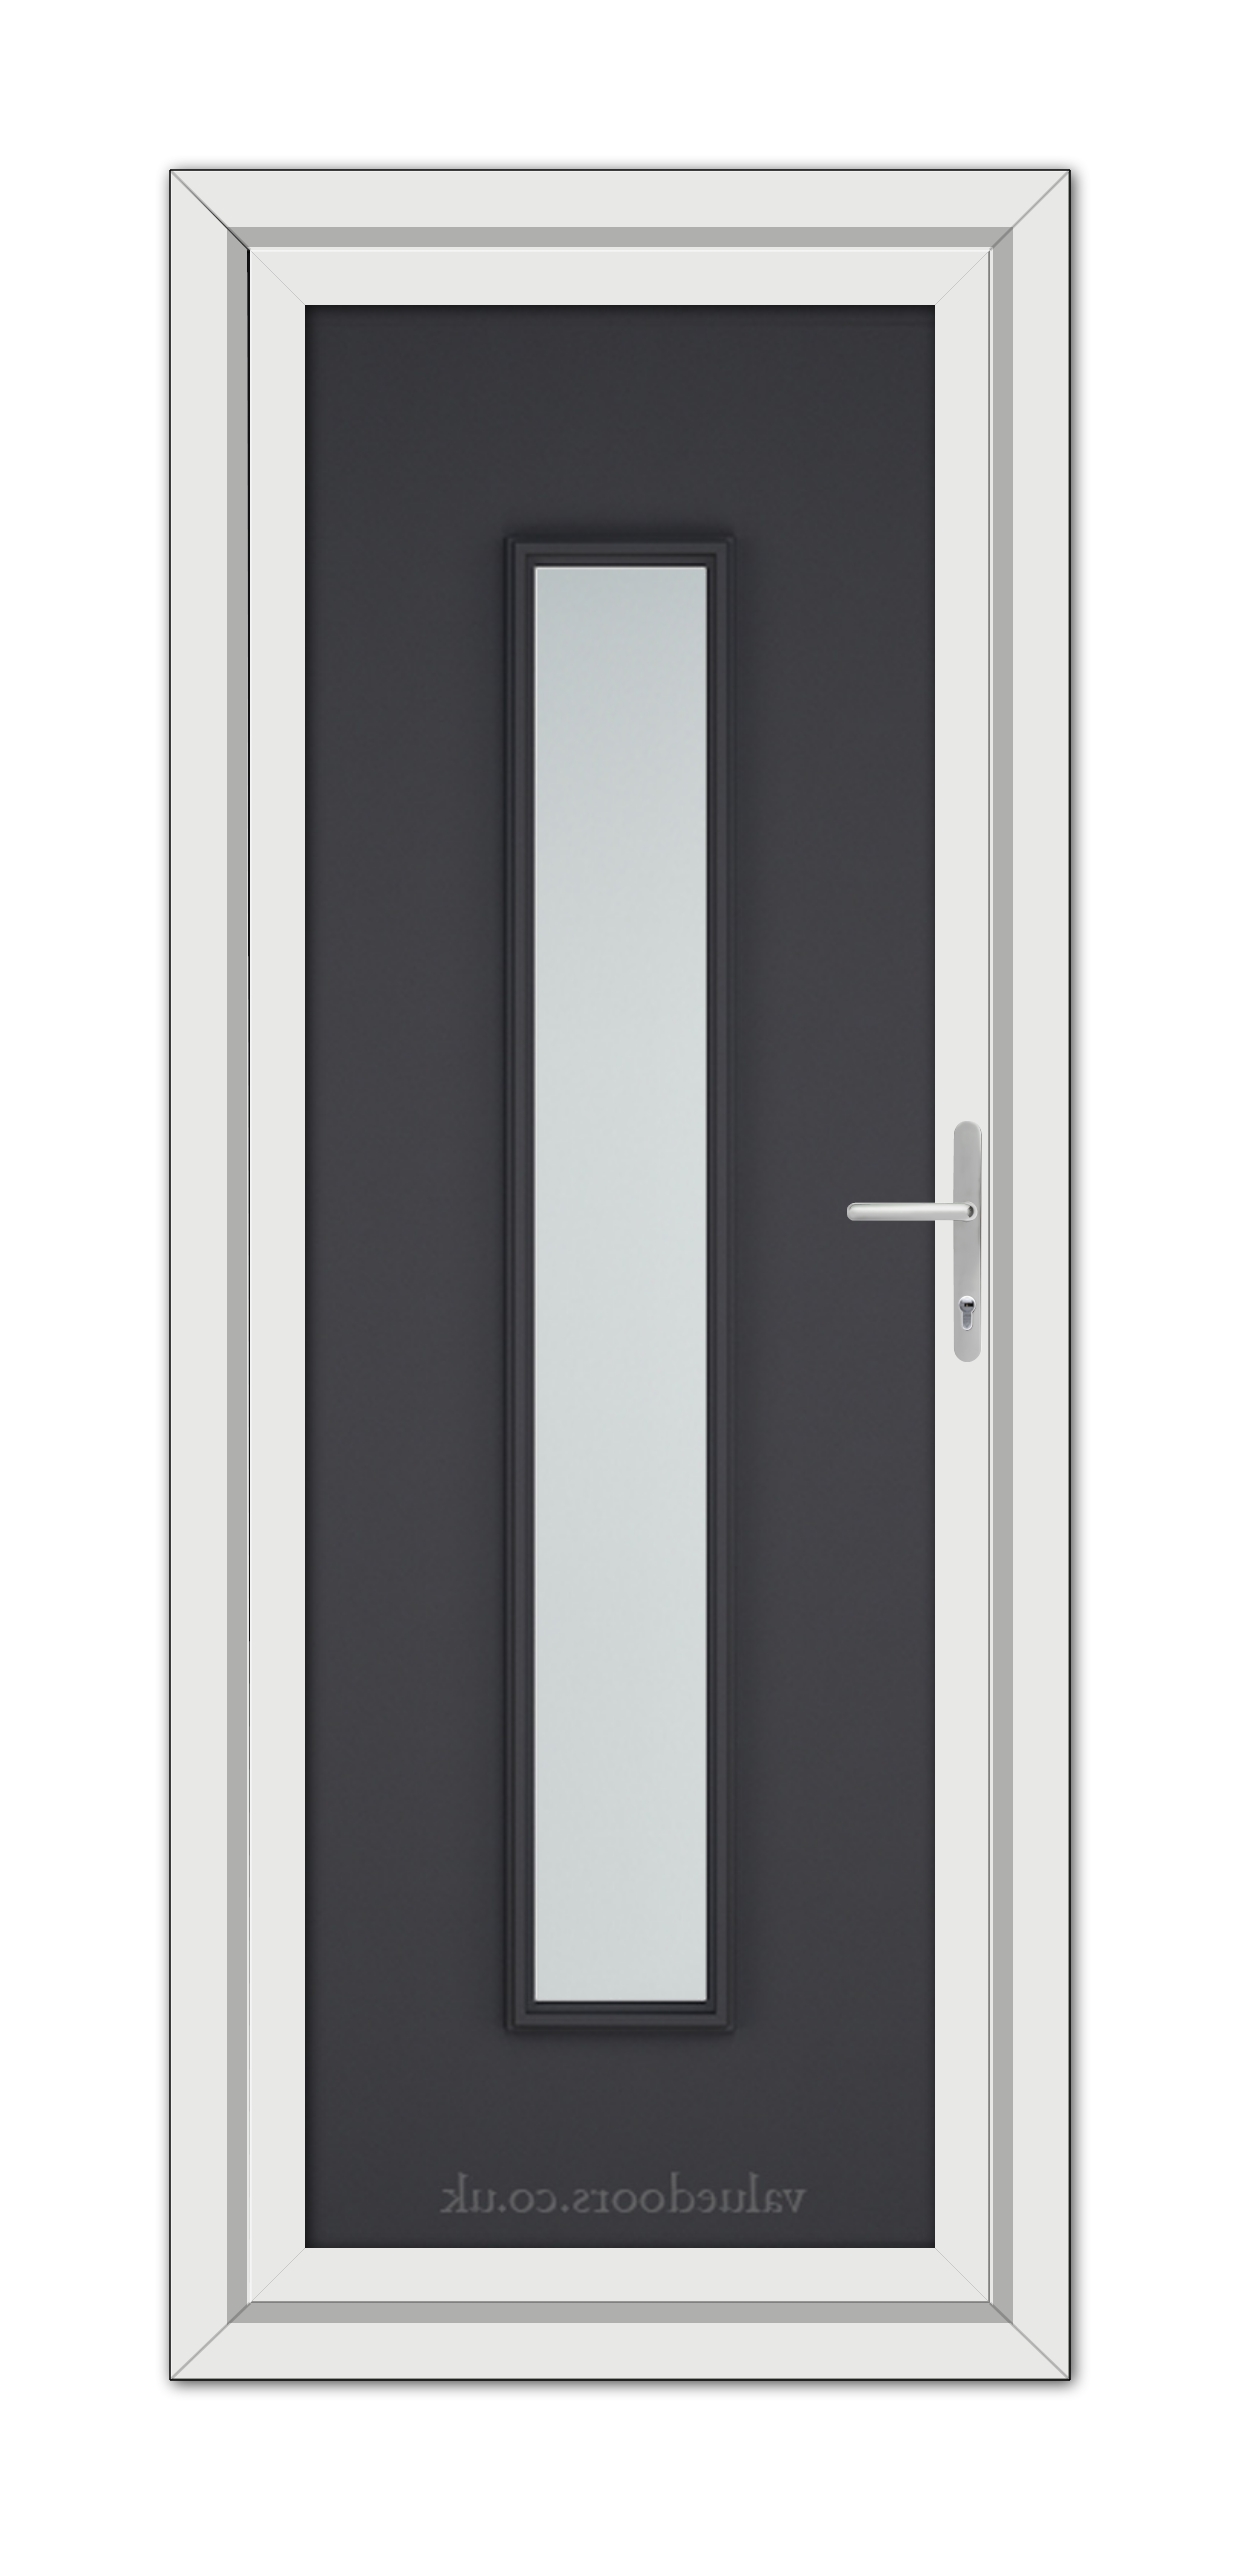 A modern Grey Rome uPVC door with a vertical glass panel, silver handle, and white frame, viewed frontally.